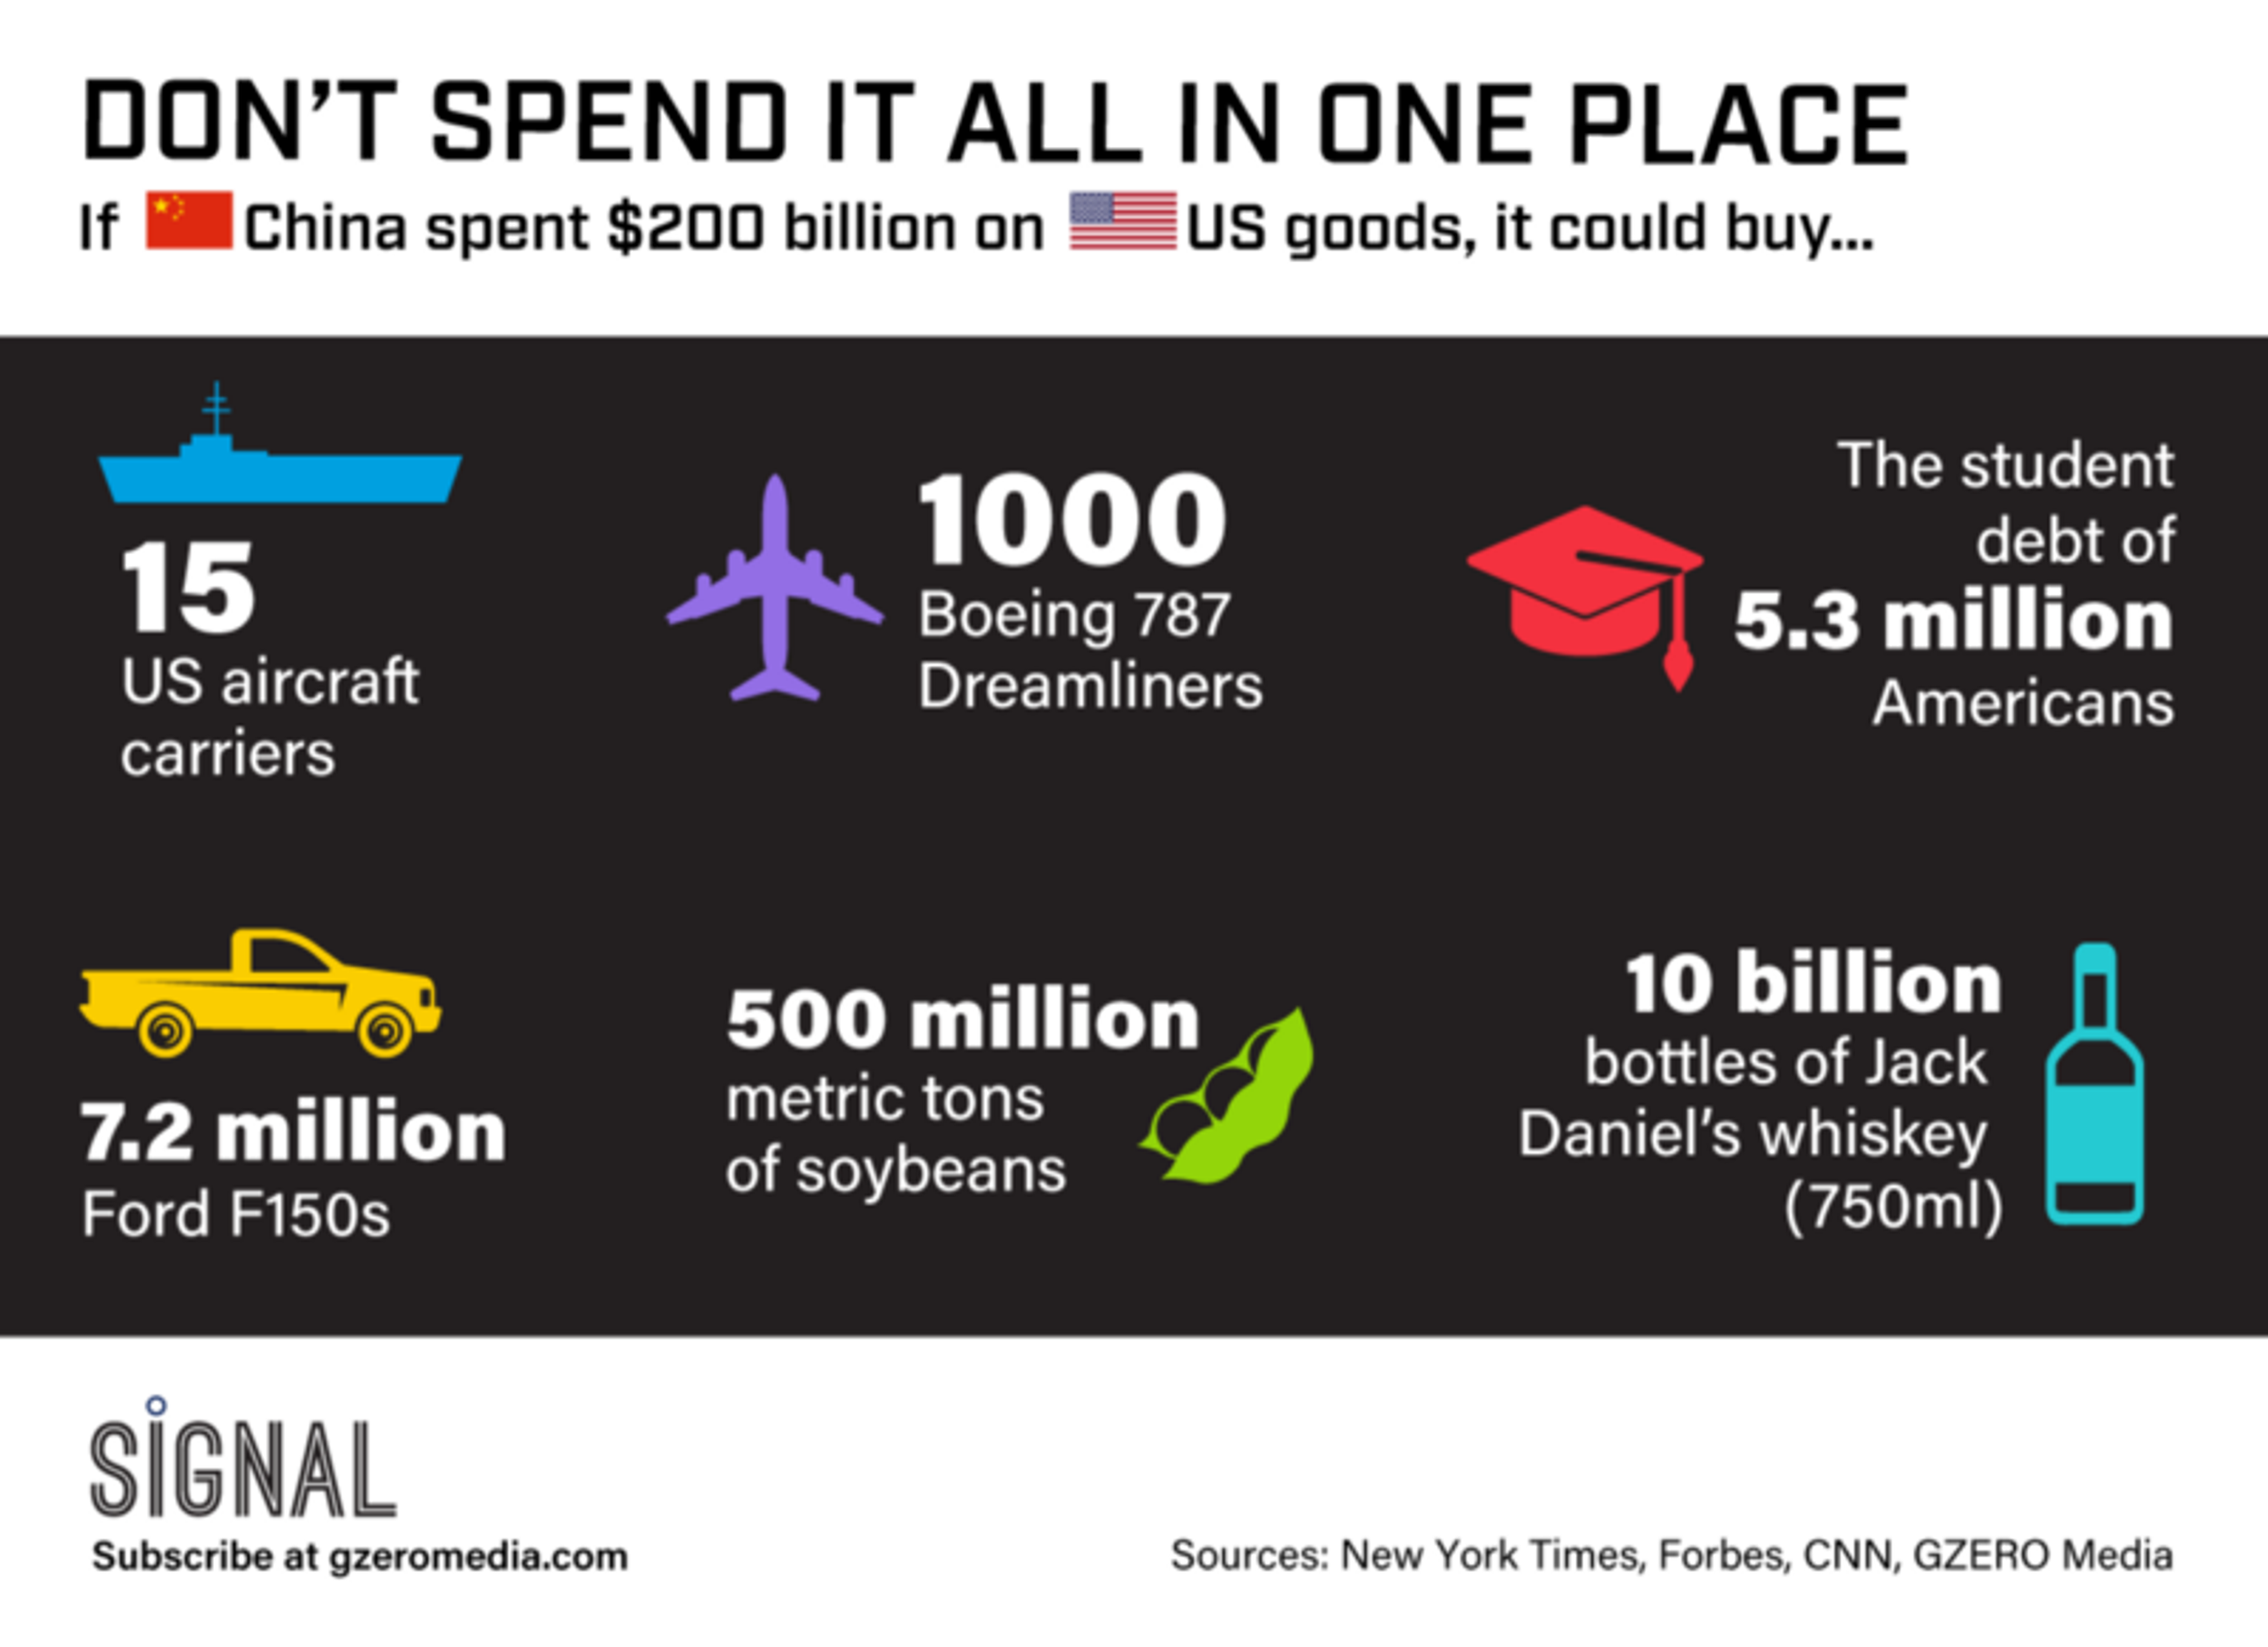 Graphic Truth: Don't Spend It All in One Place